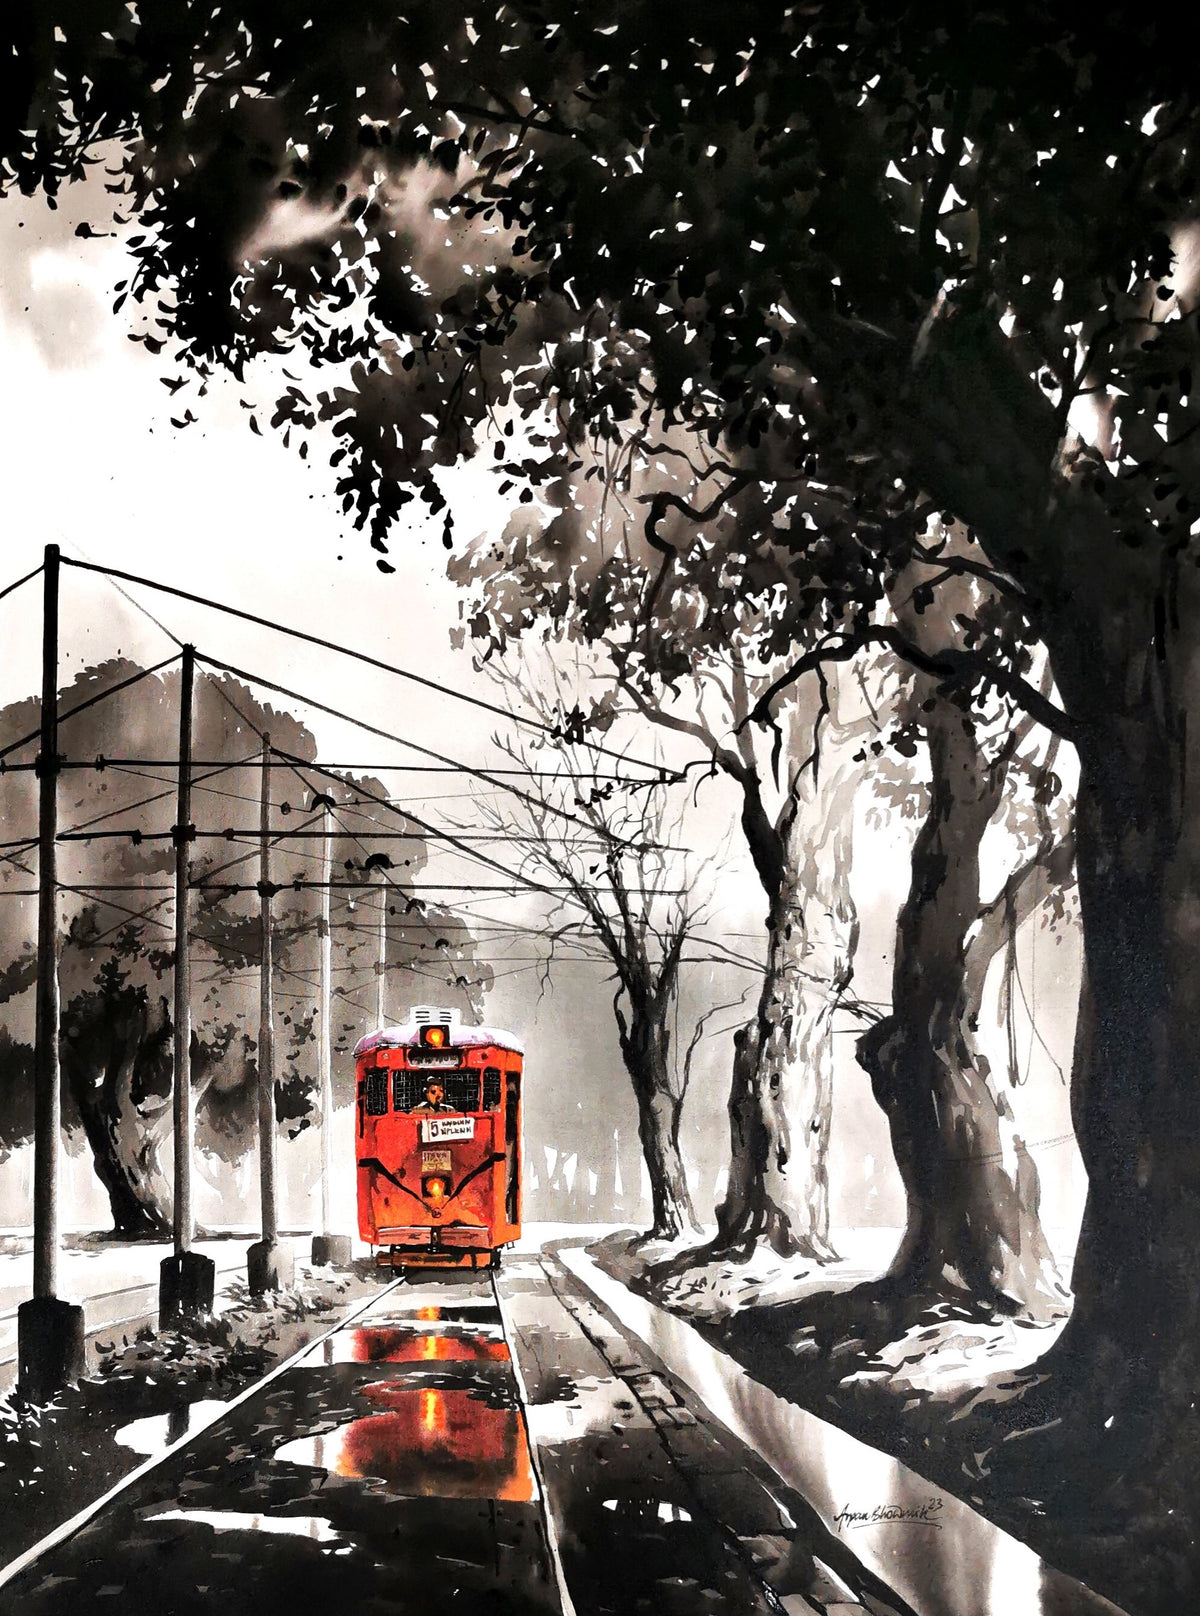 A stunning cityscape of Kolkatta with  the signature red tram evoking memories of old city against a monochrome backdrop